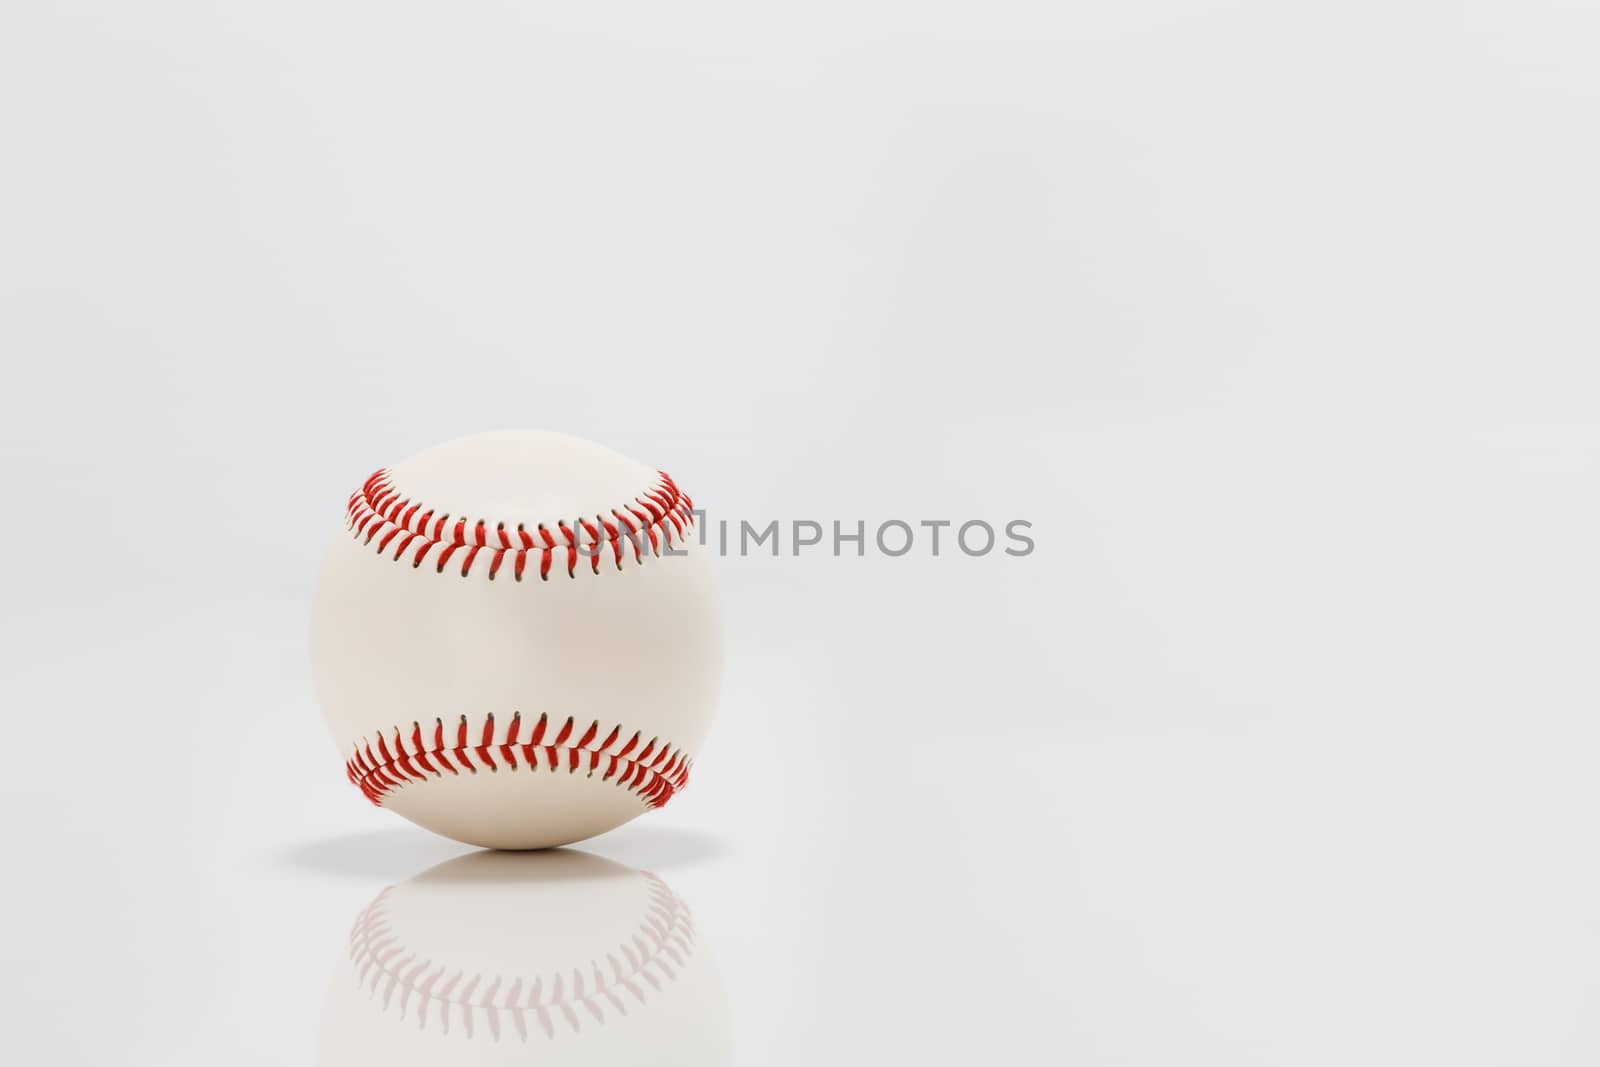 Professional baseball on white background. Isolated and reflecting in the surface below it.